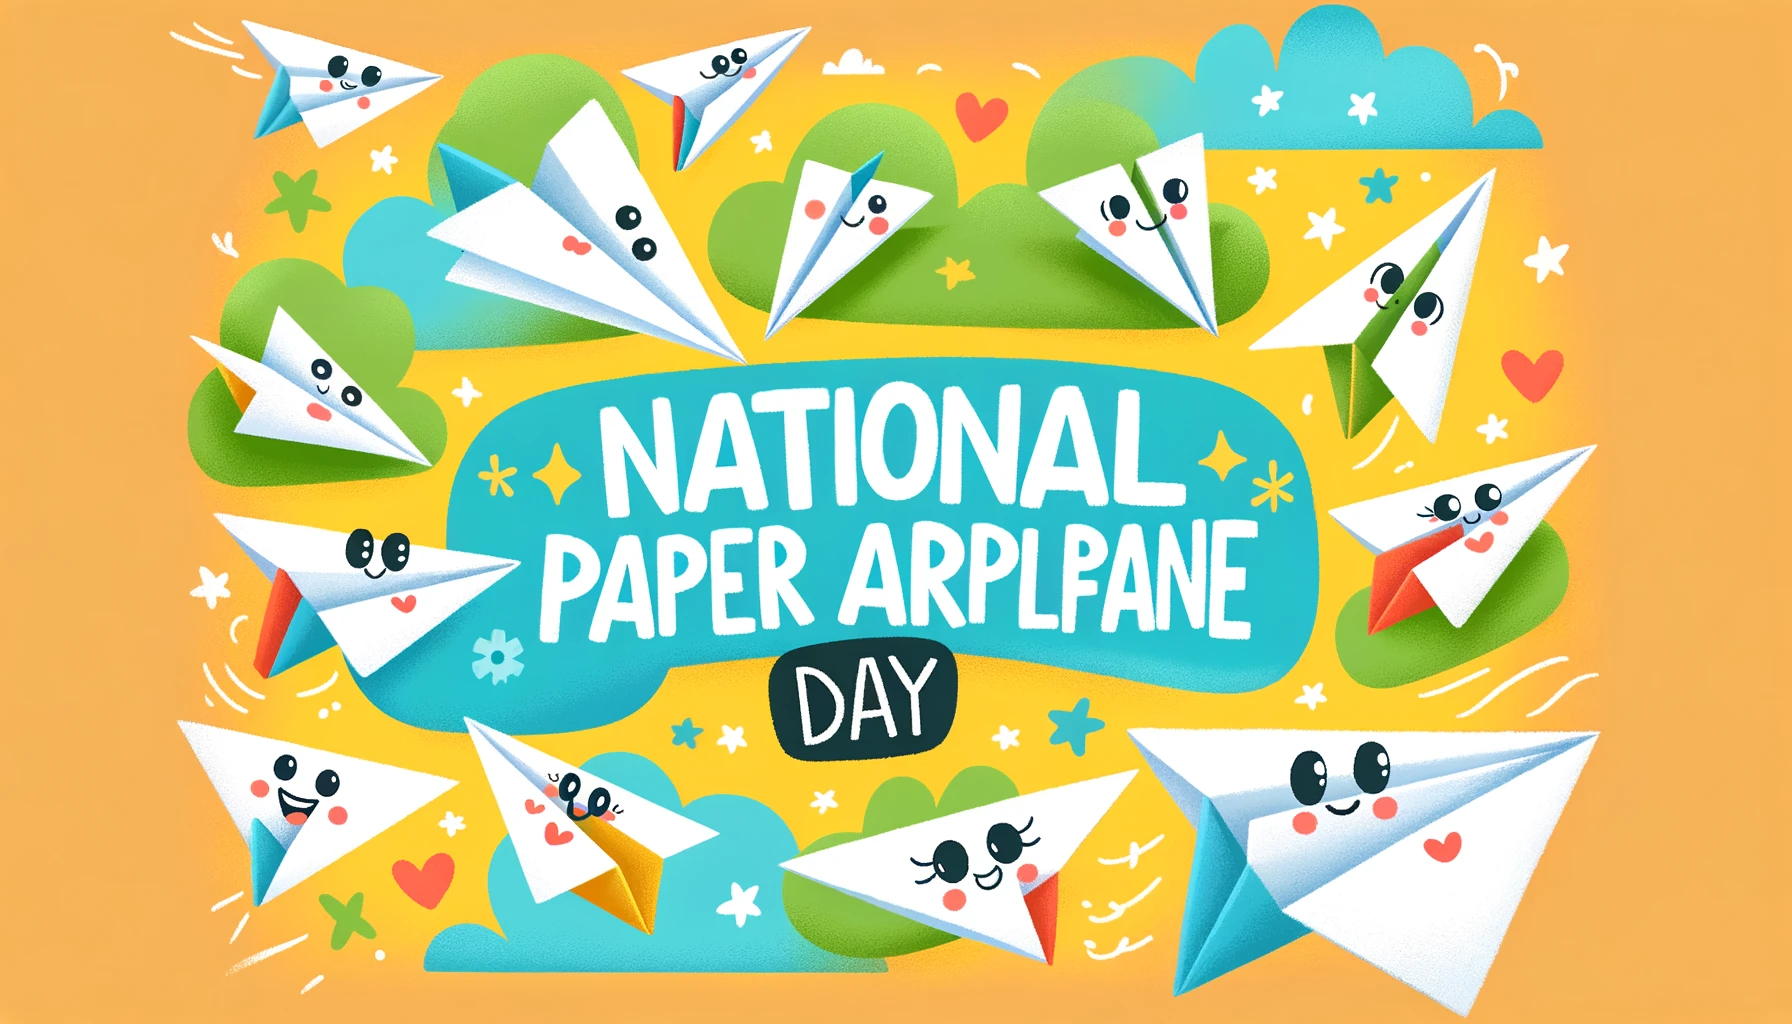 Best Paper Airplane Day Messages for Enthusiasts